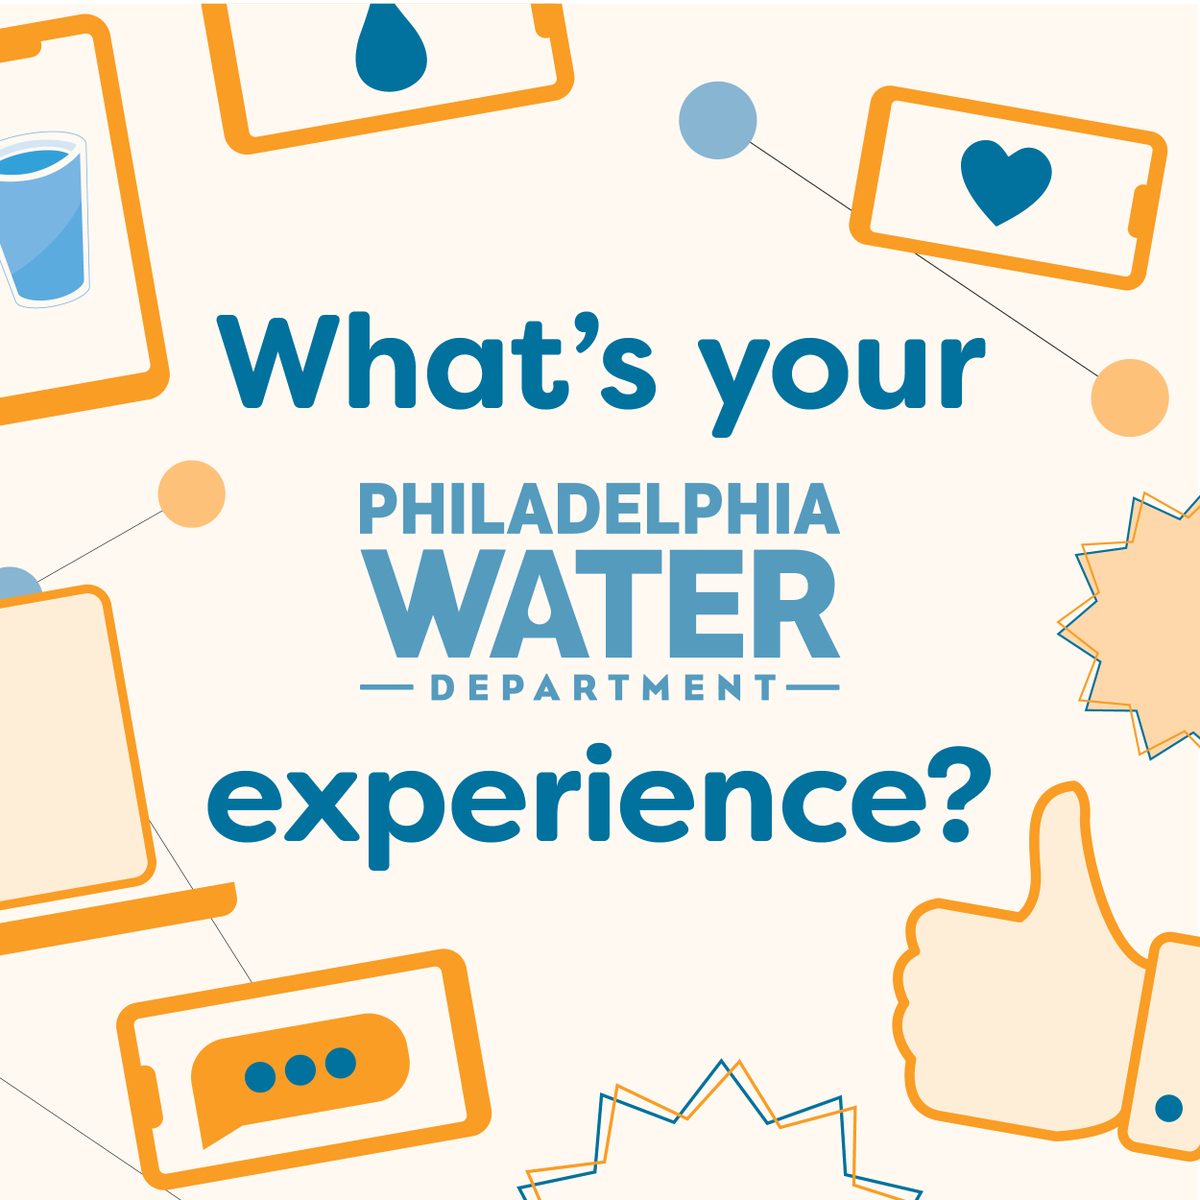 Help out our friends at @PhillyH2O with their survey and get a chance to win a $100 gift card! Take the survey here: pwdsurvey2023.com/ig